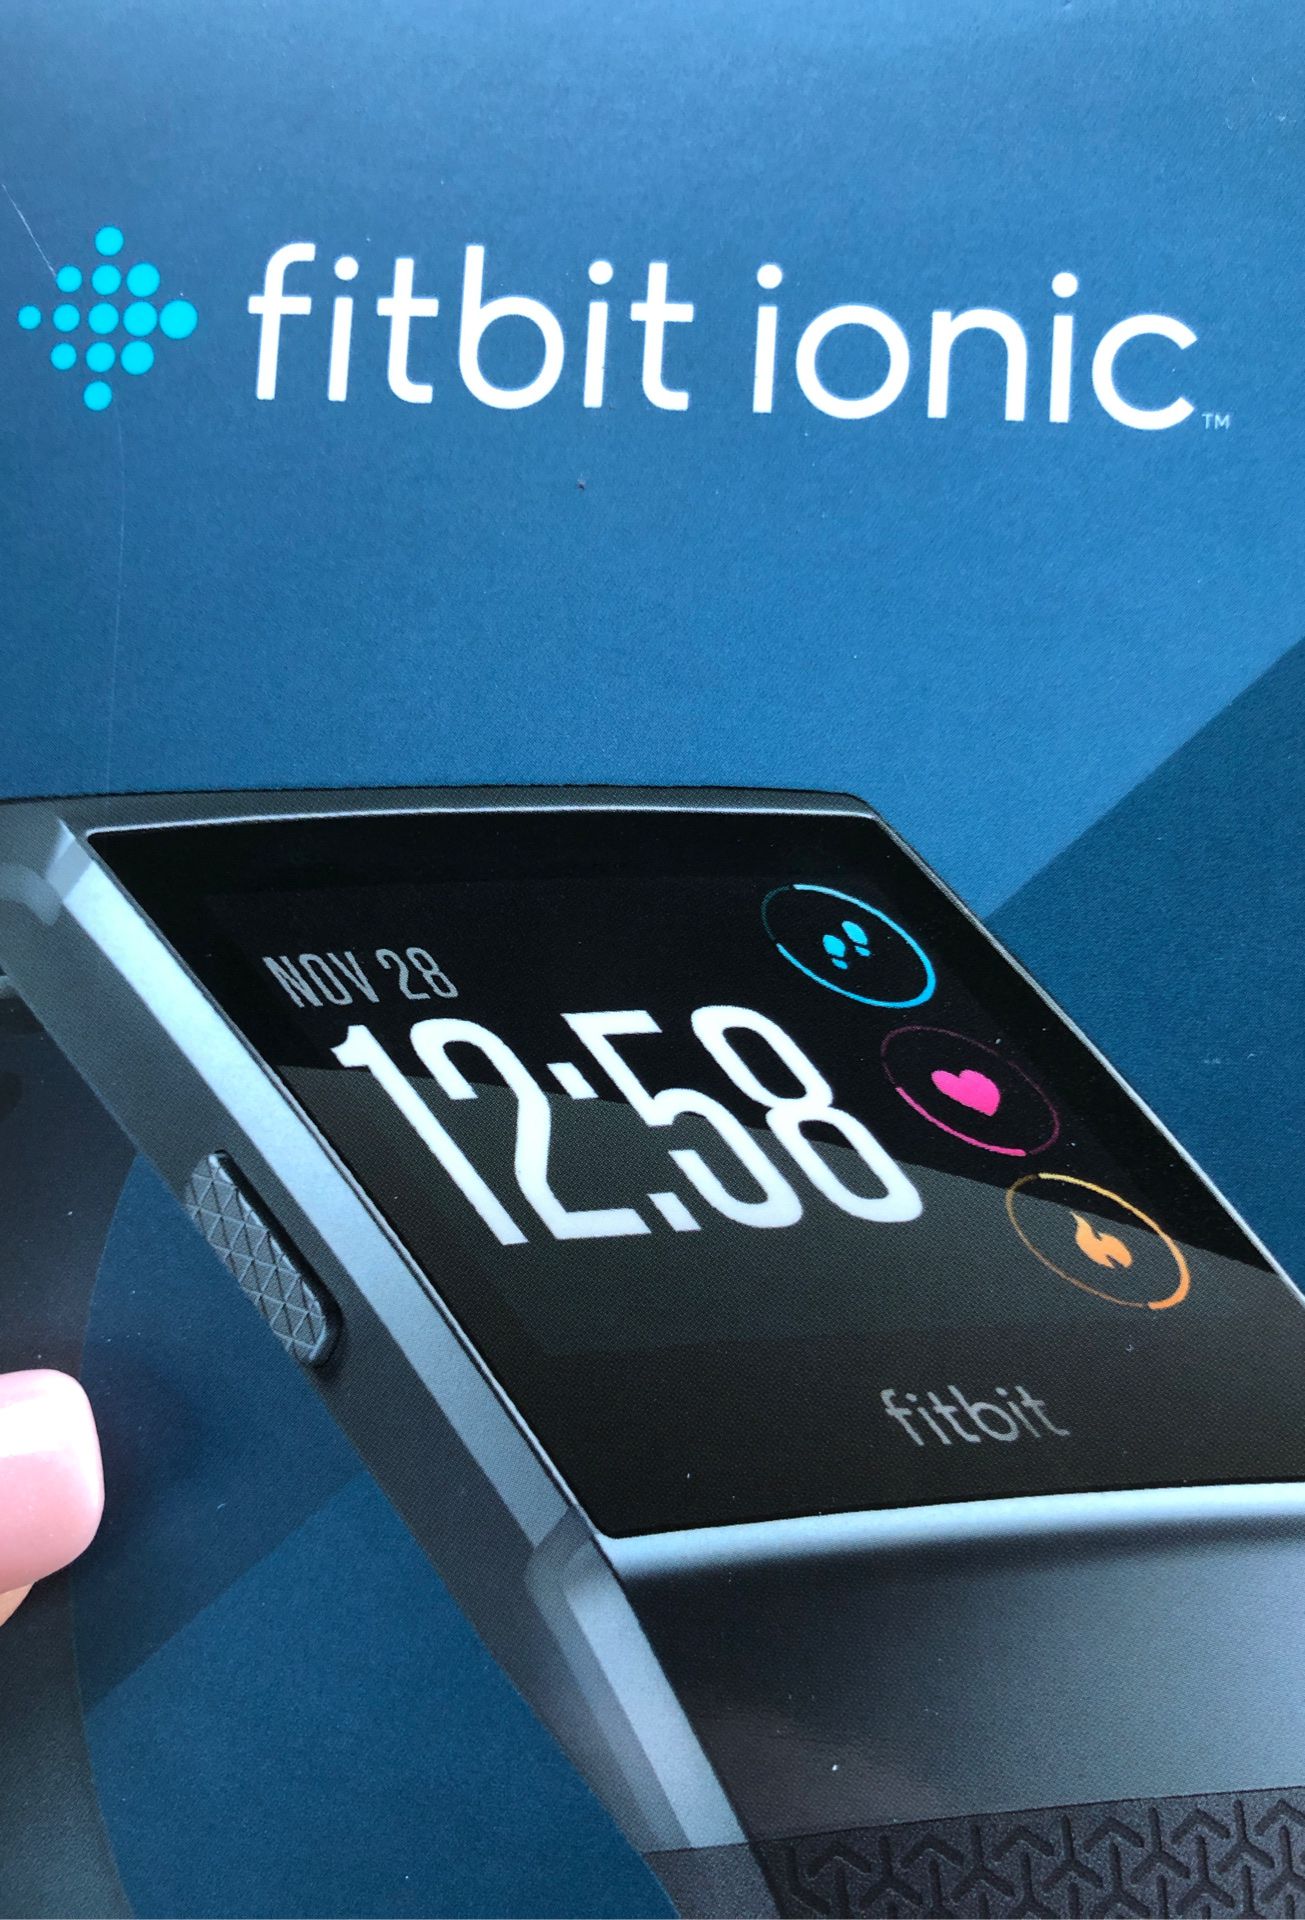 Fitbit ionic - will ship if needed